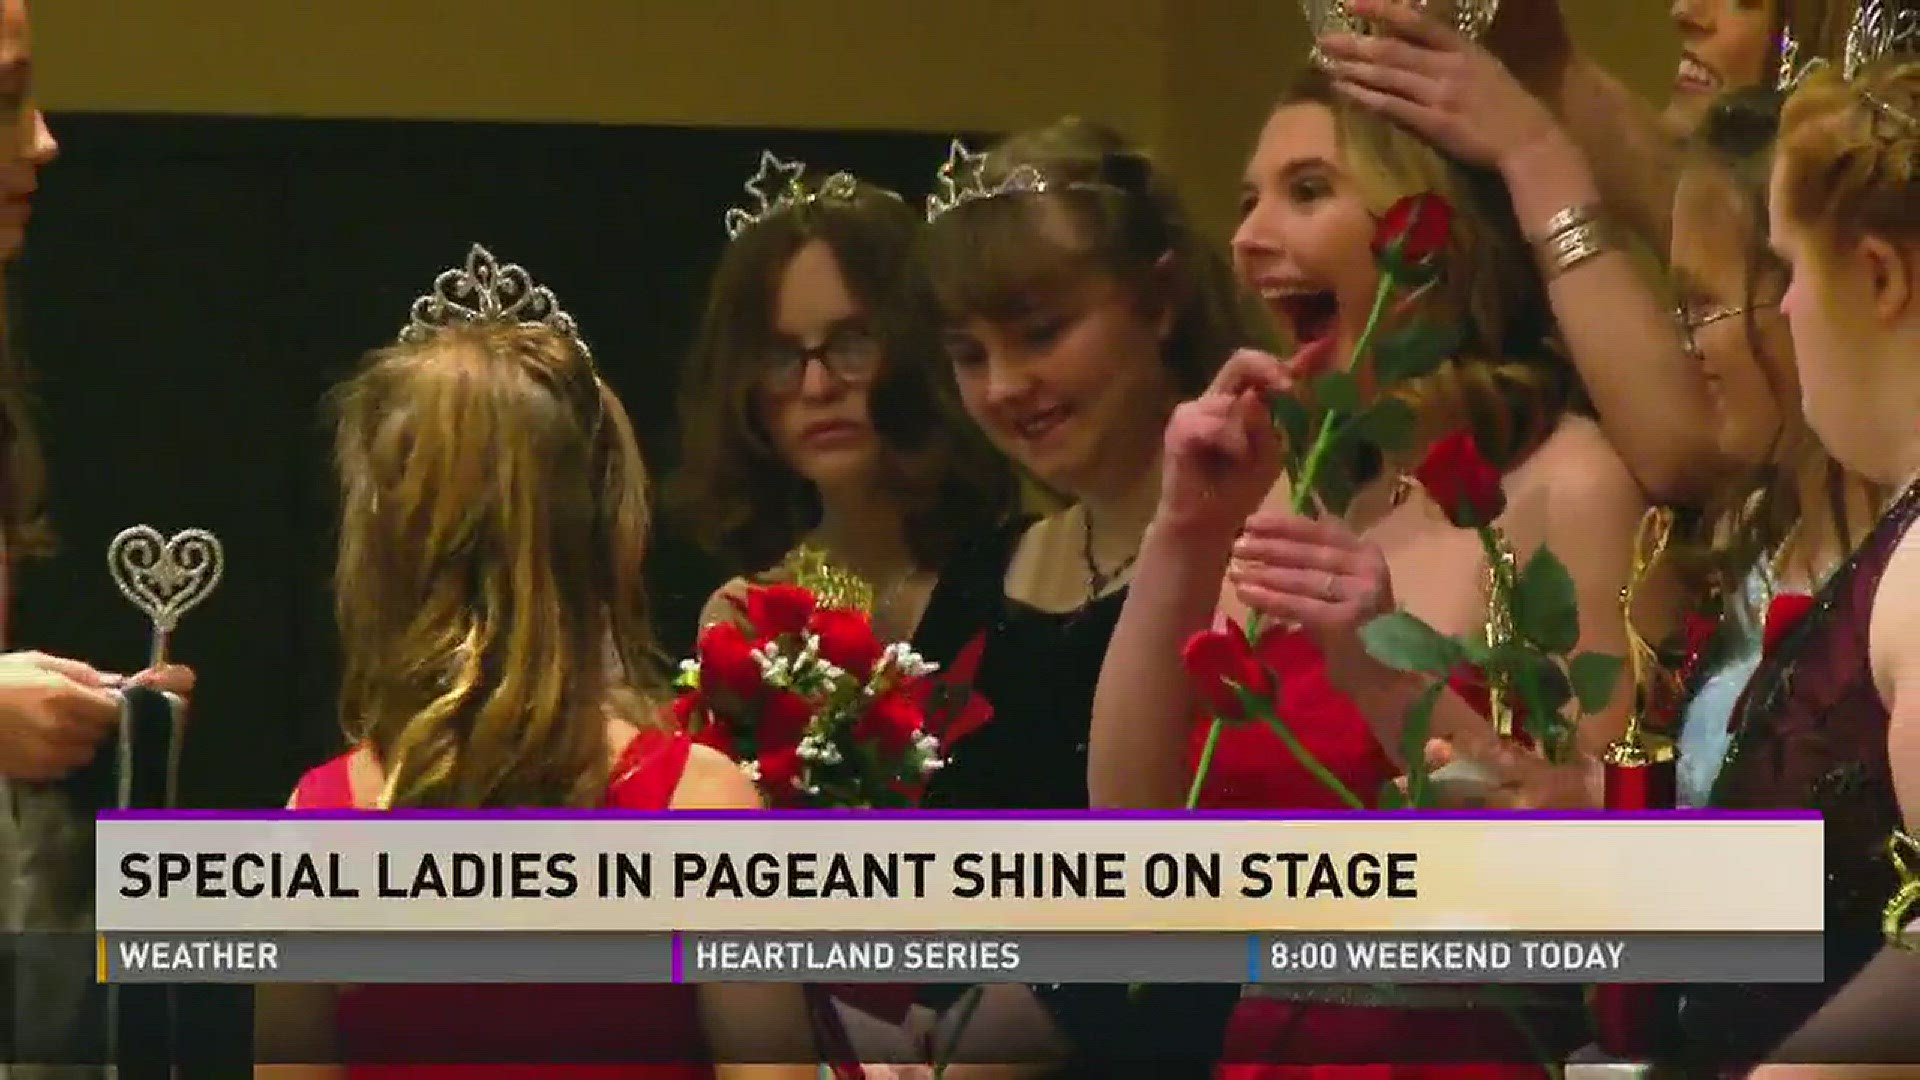 Young ladies with special needs showed their grace and beauty on stage at the Miss Shining Star pageant Saturday.